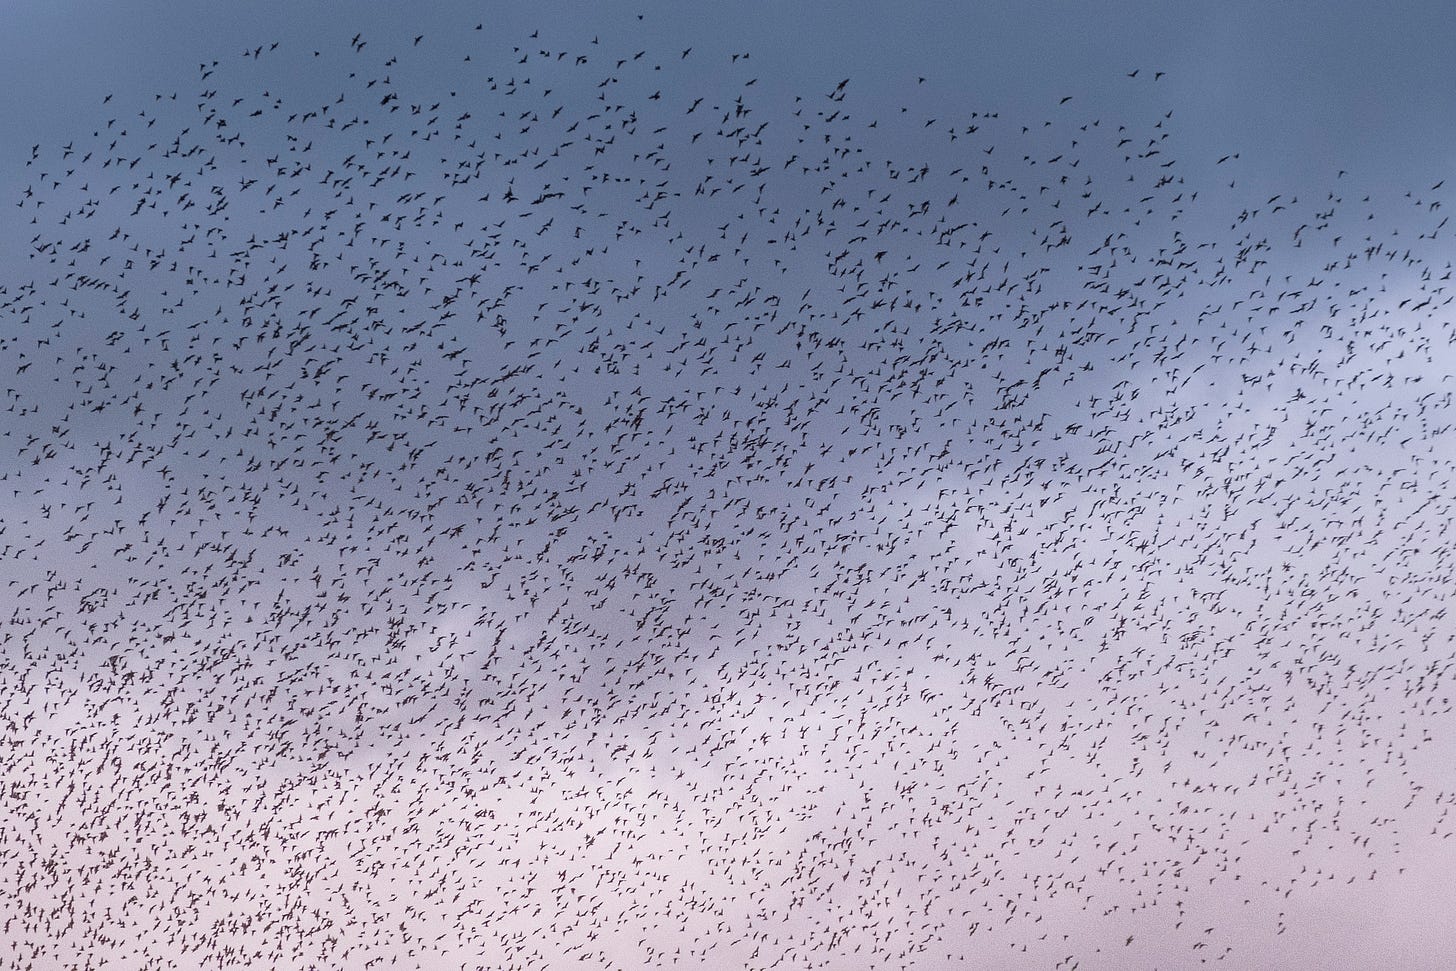 A cloud of hundreds (maybe thousands) of starlings, showing black against a grey sky.